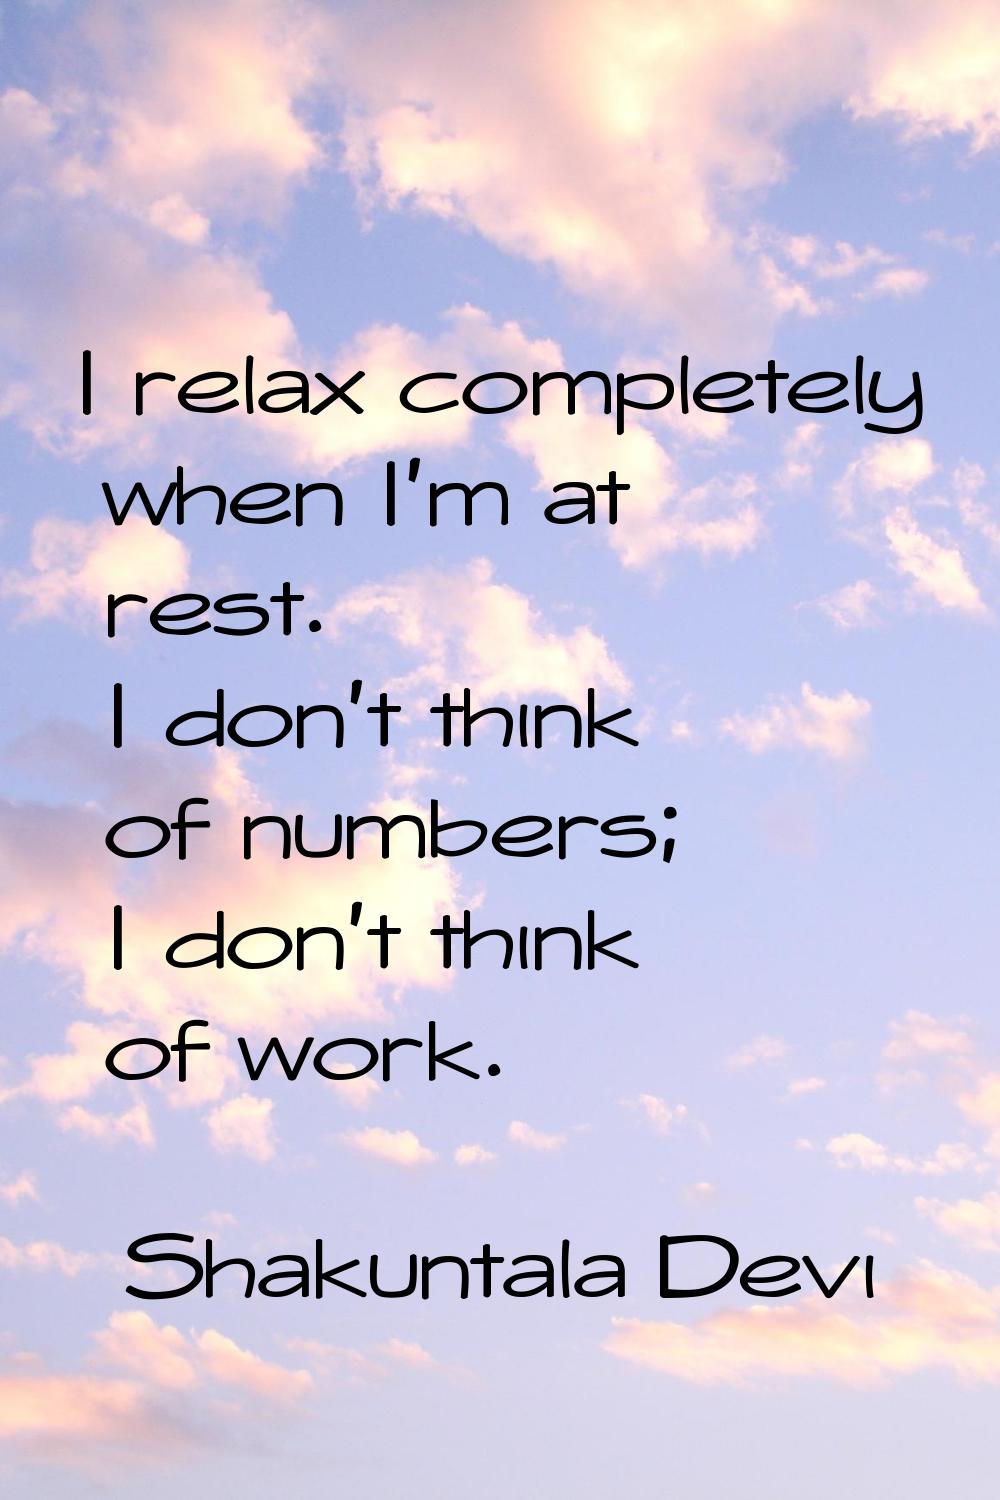 I relax completely when I'm at rest. I don't think of numbers; I don't think of work.